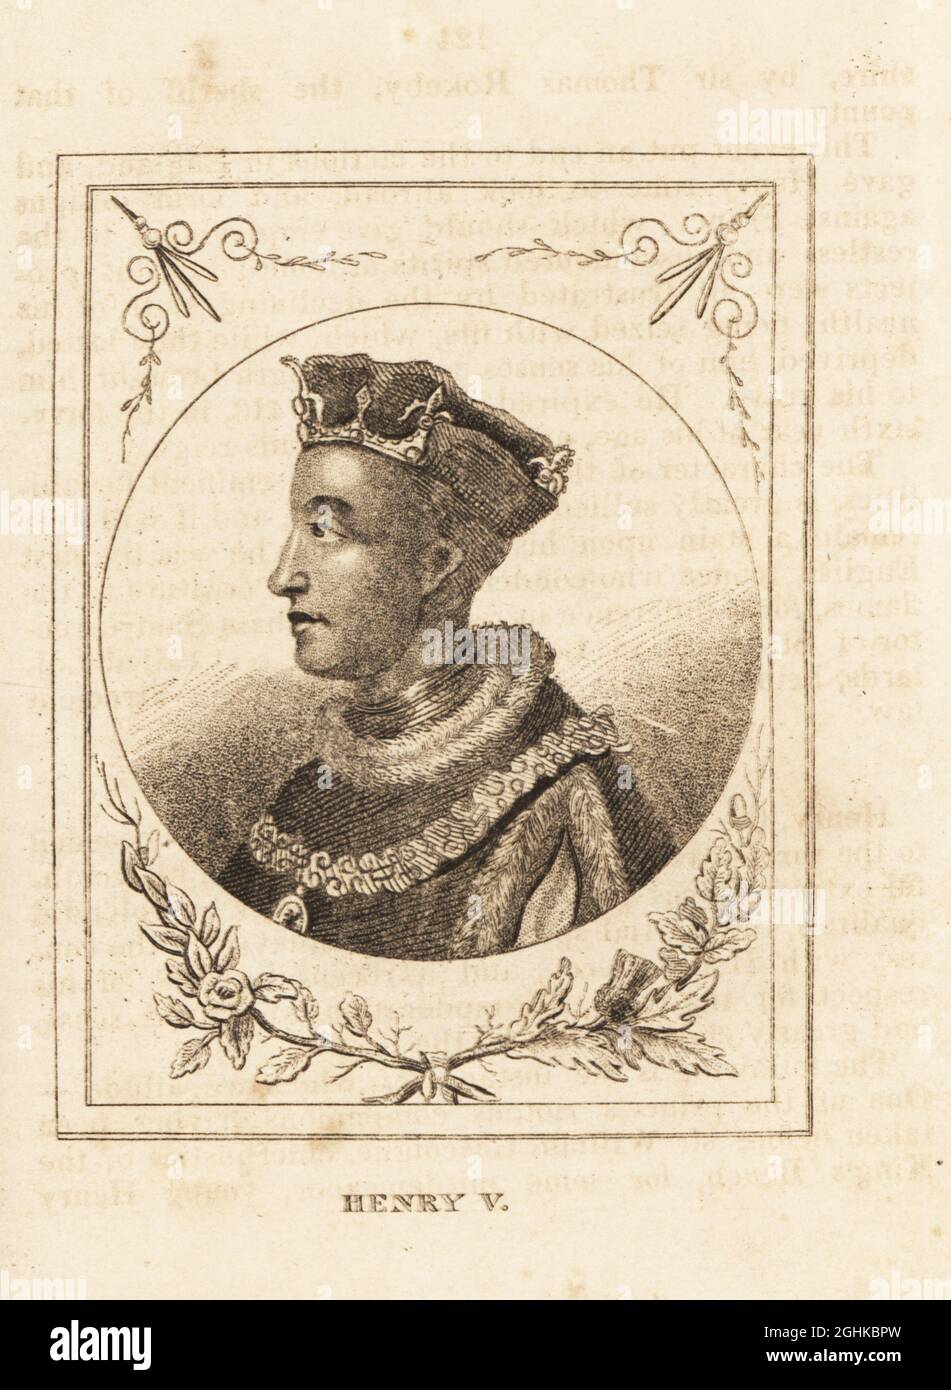 Portrait of King Henry V of England, 1386-1422. In crown, ermine-lined cape, chain of office. Copperplate engraving from M. A. Jones’ History of England from Julius Caesar to George IV, G. Virtue, 26 Ivy Lane, London, 1836. Stock Photo